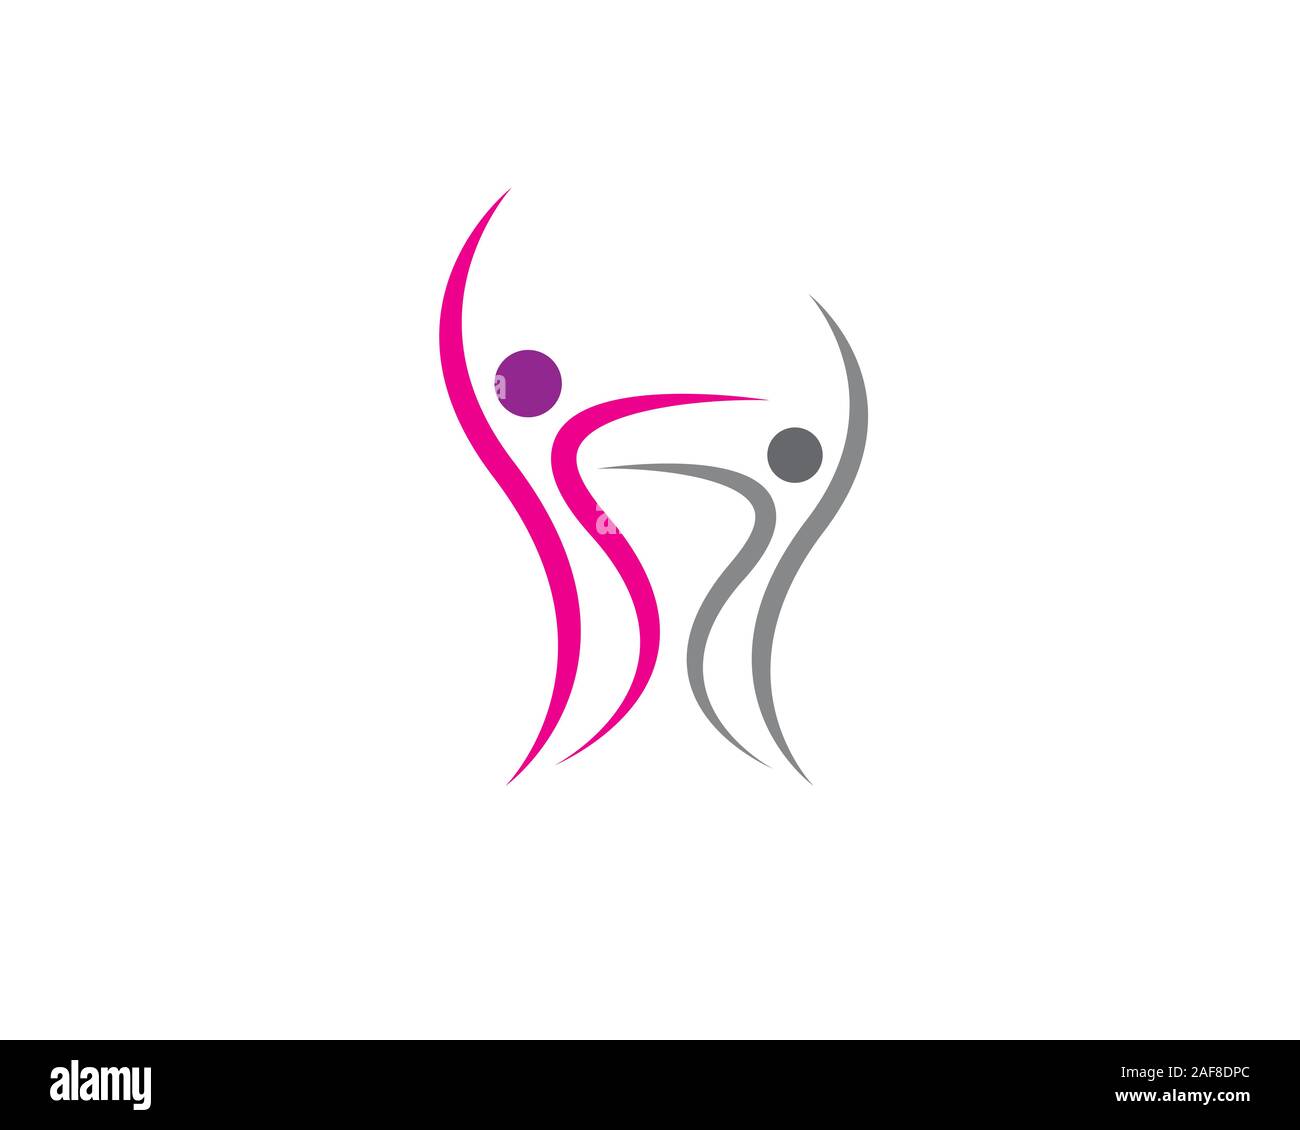 two simple swoosh figures dancing together in flat style Stock Vector